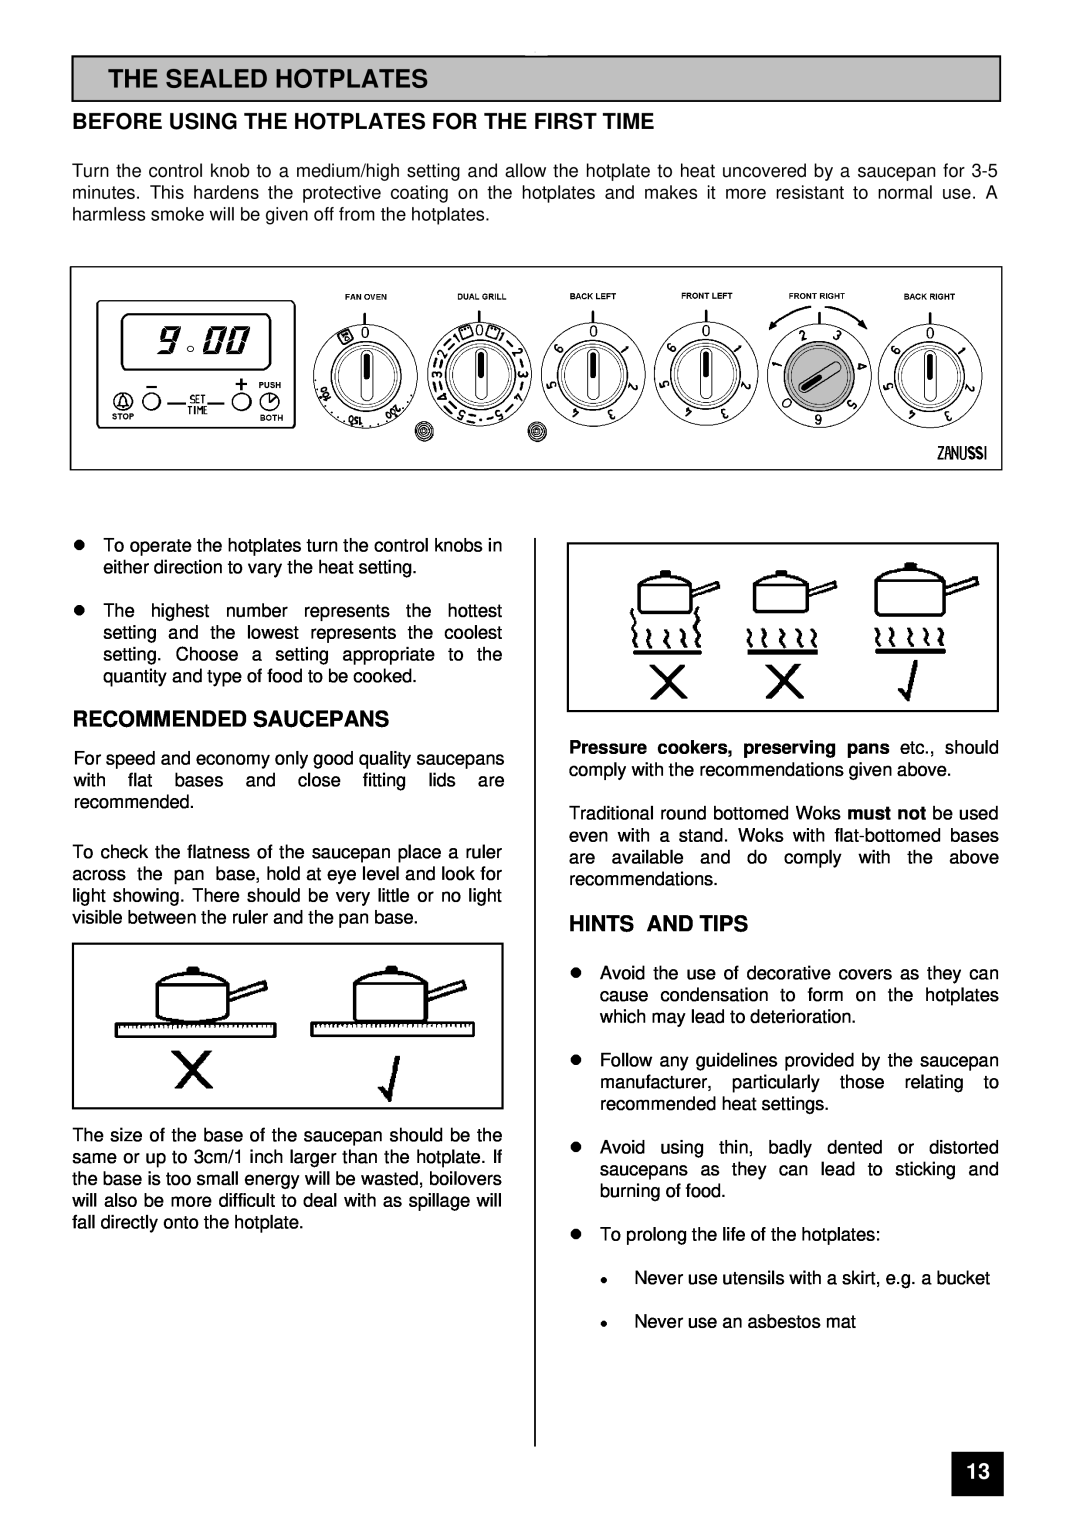 Zanussi ZCE 7350 manual The Sealed Hotplates, Before Using The Hotplates For The First Time, Recommended Saucepans 